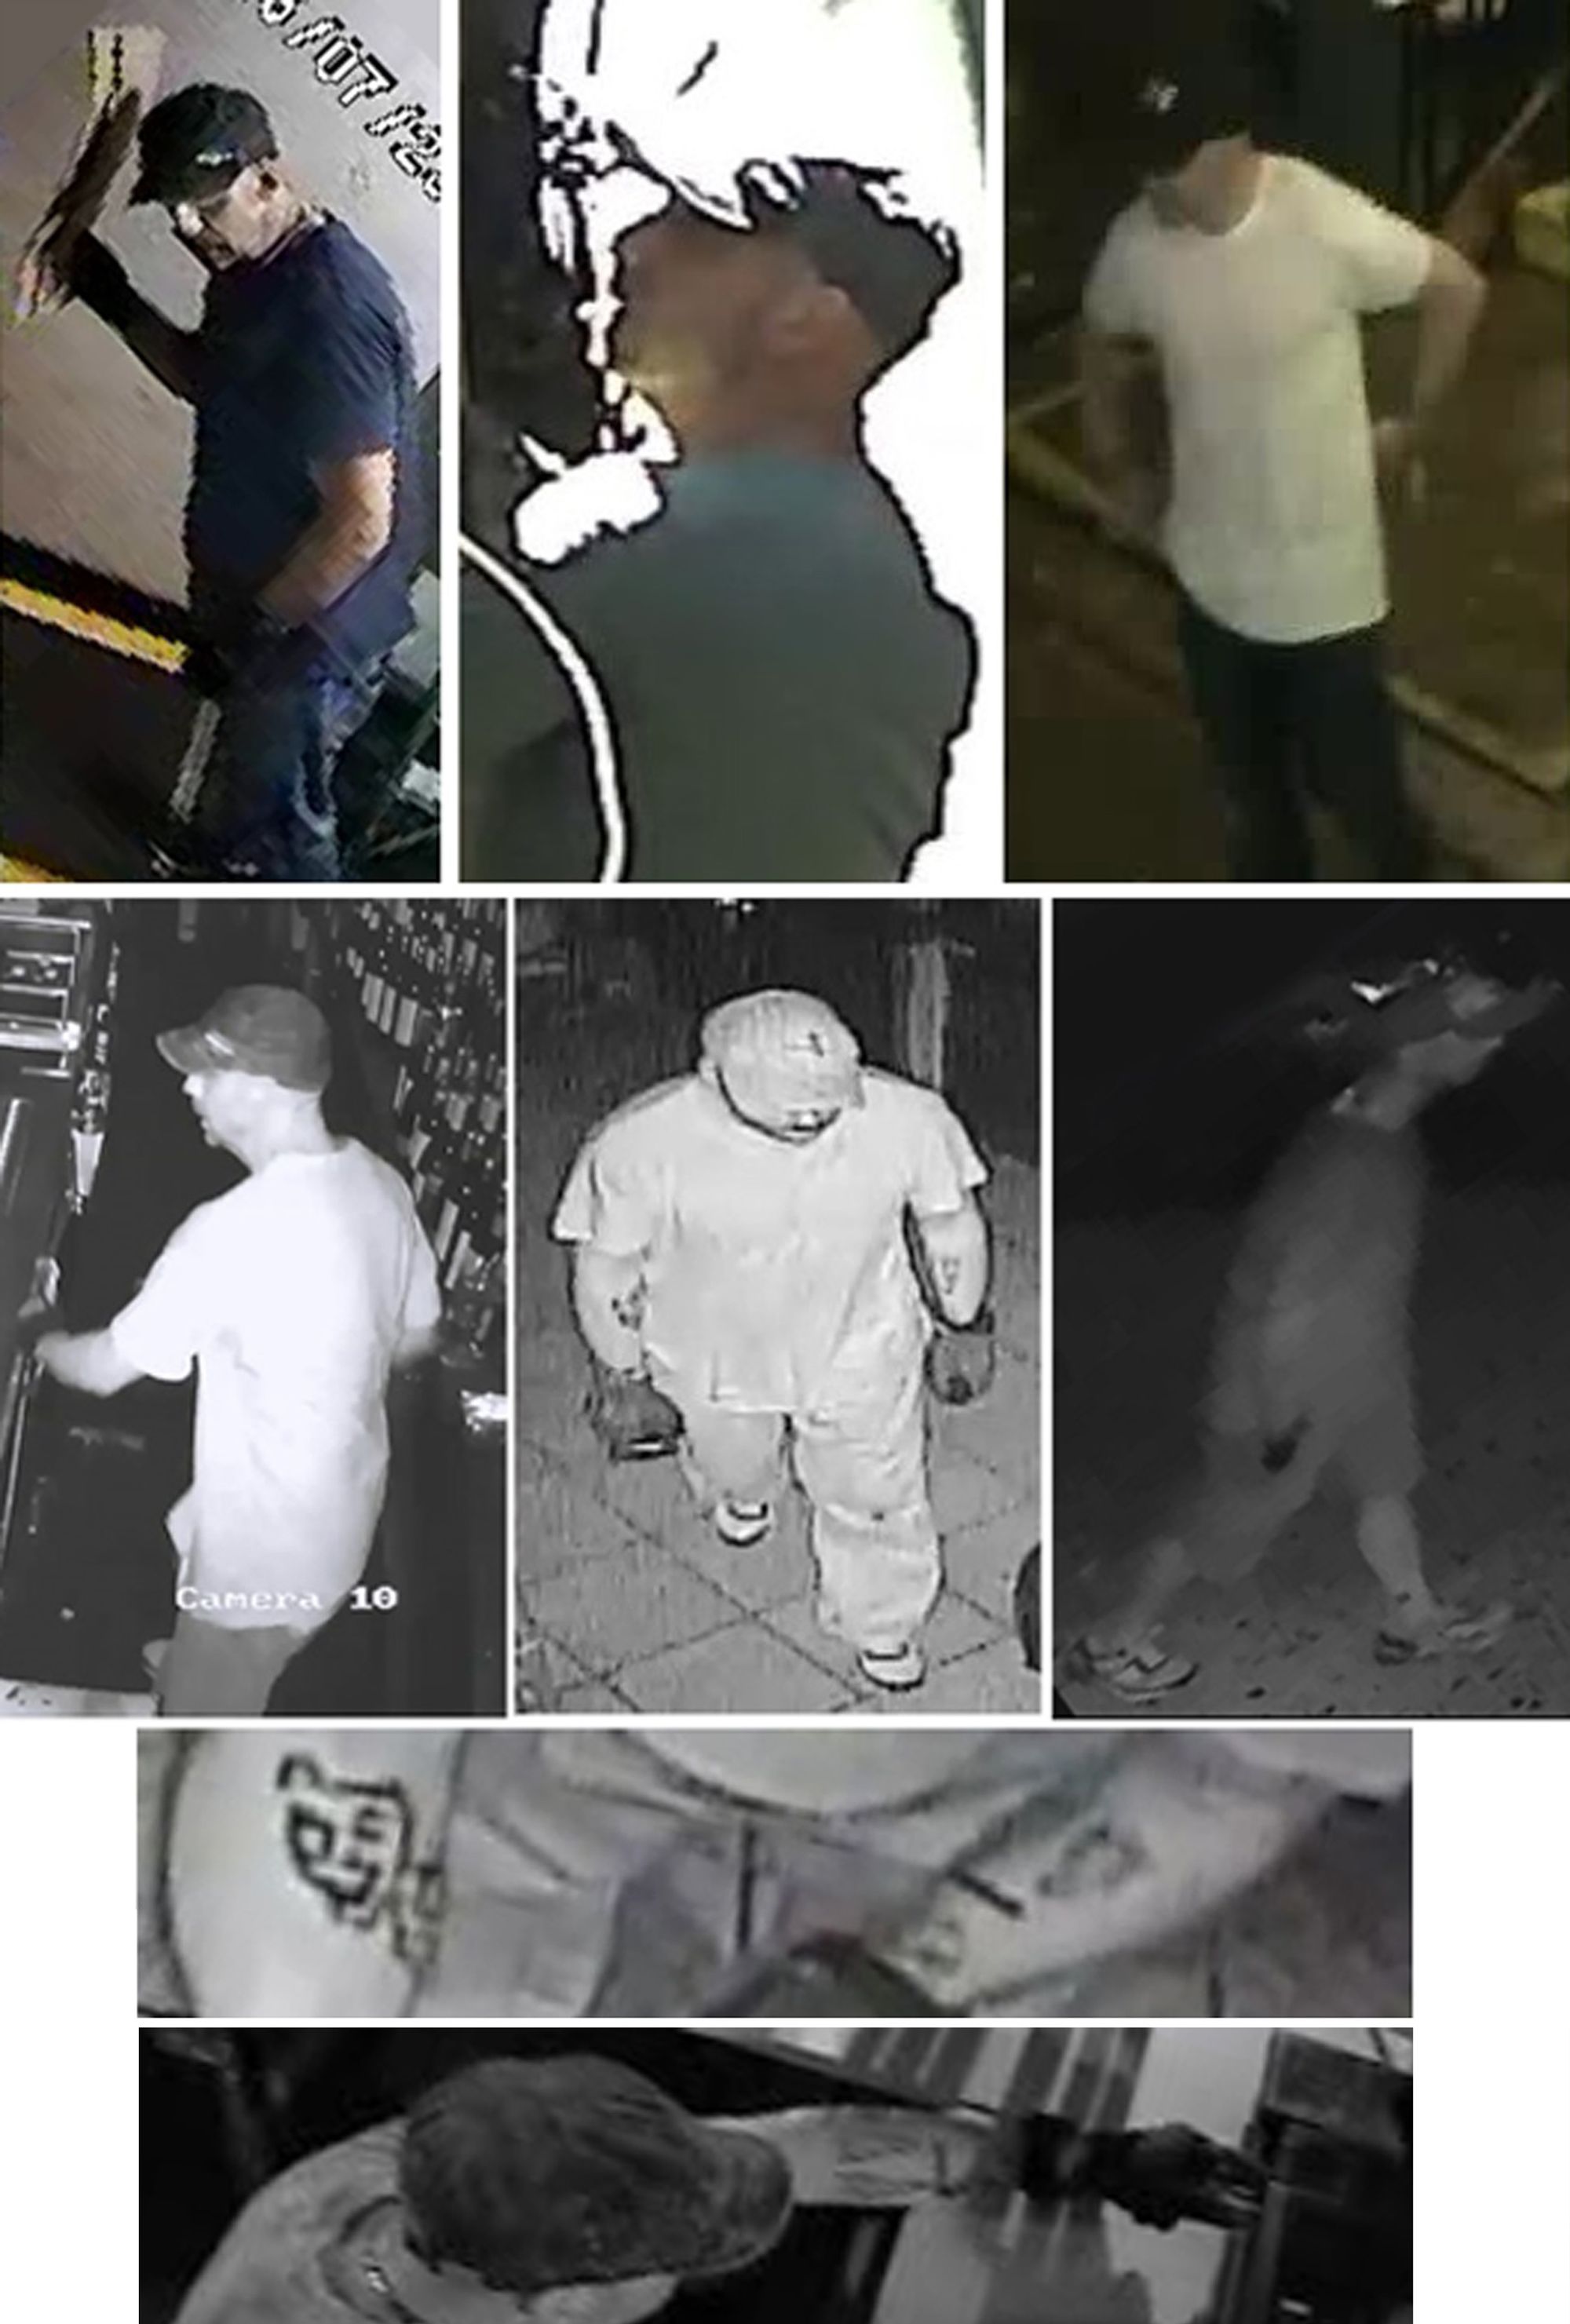 The suspect during his series of burglaries. Photo via NYPD.